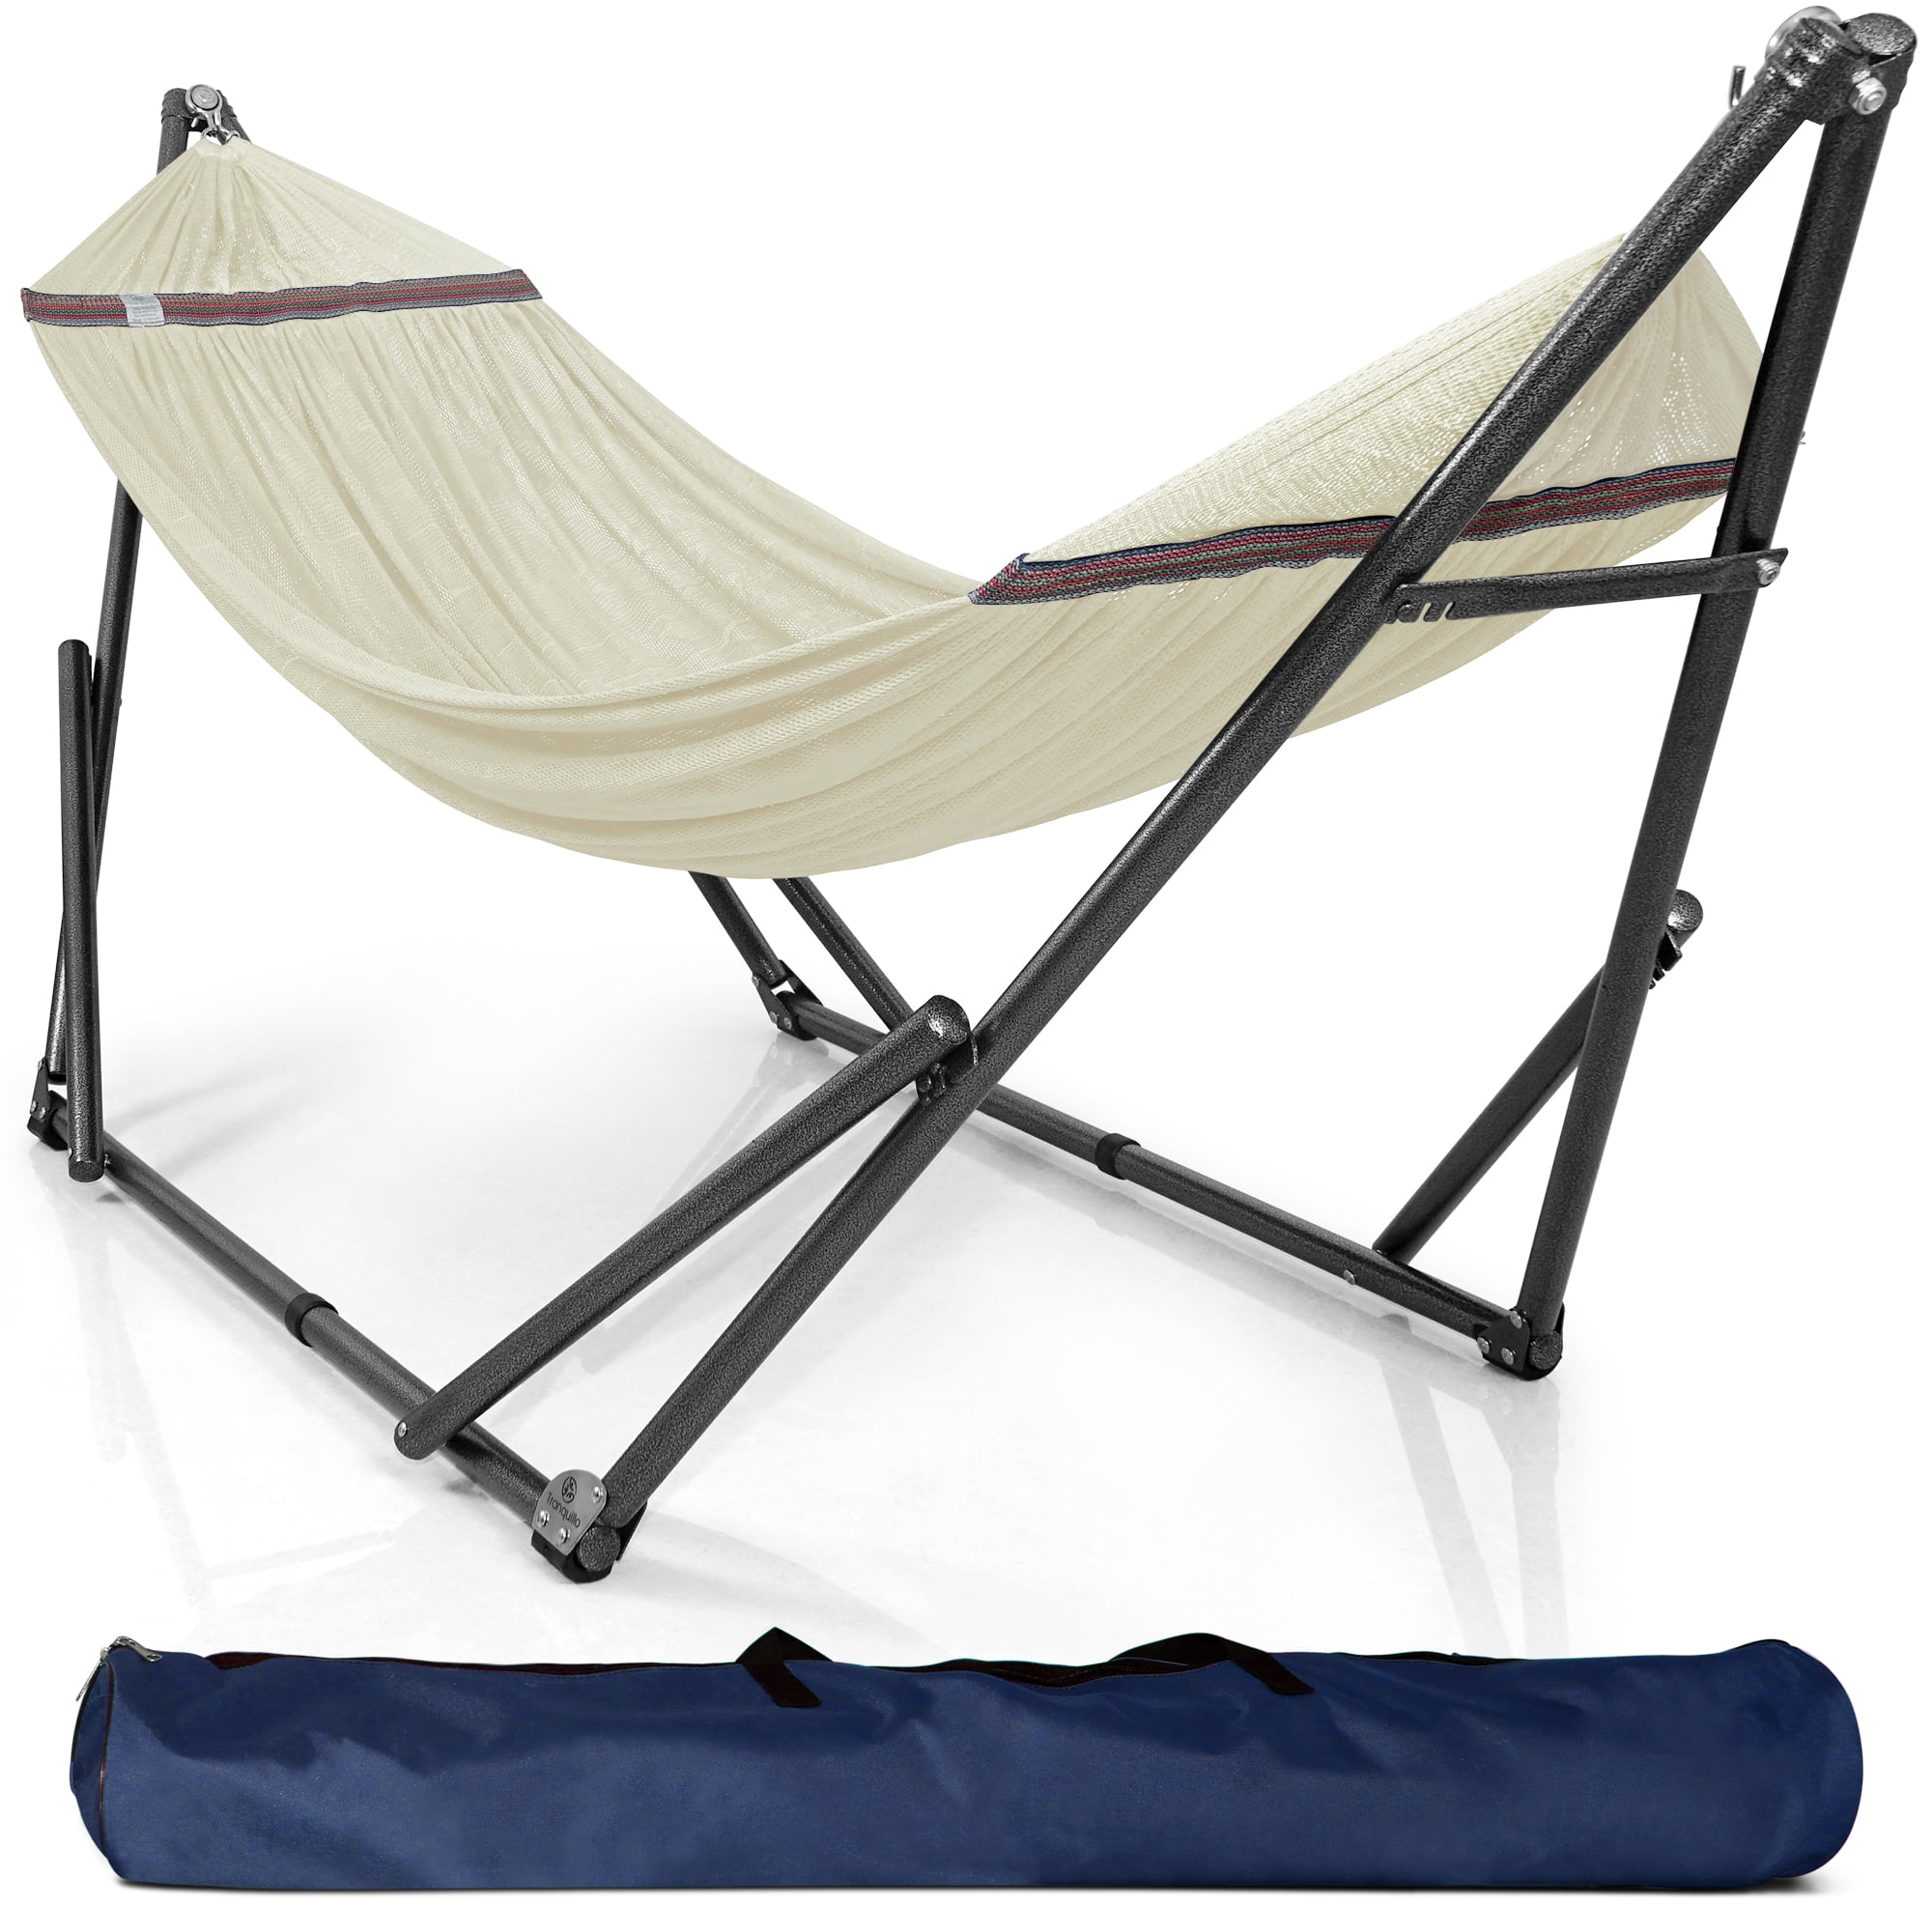 Double Grey Tranquillo YW2N Universal Stand-1.2mm Thickness Steel Frame with Hammock Net 